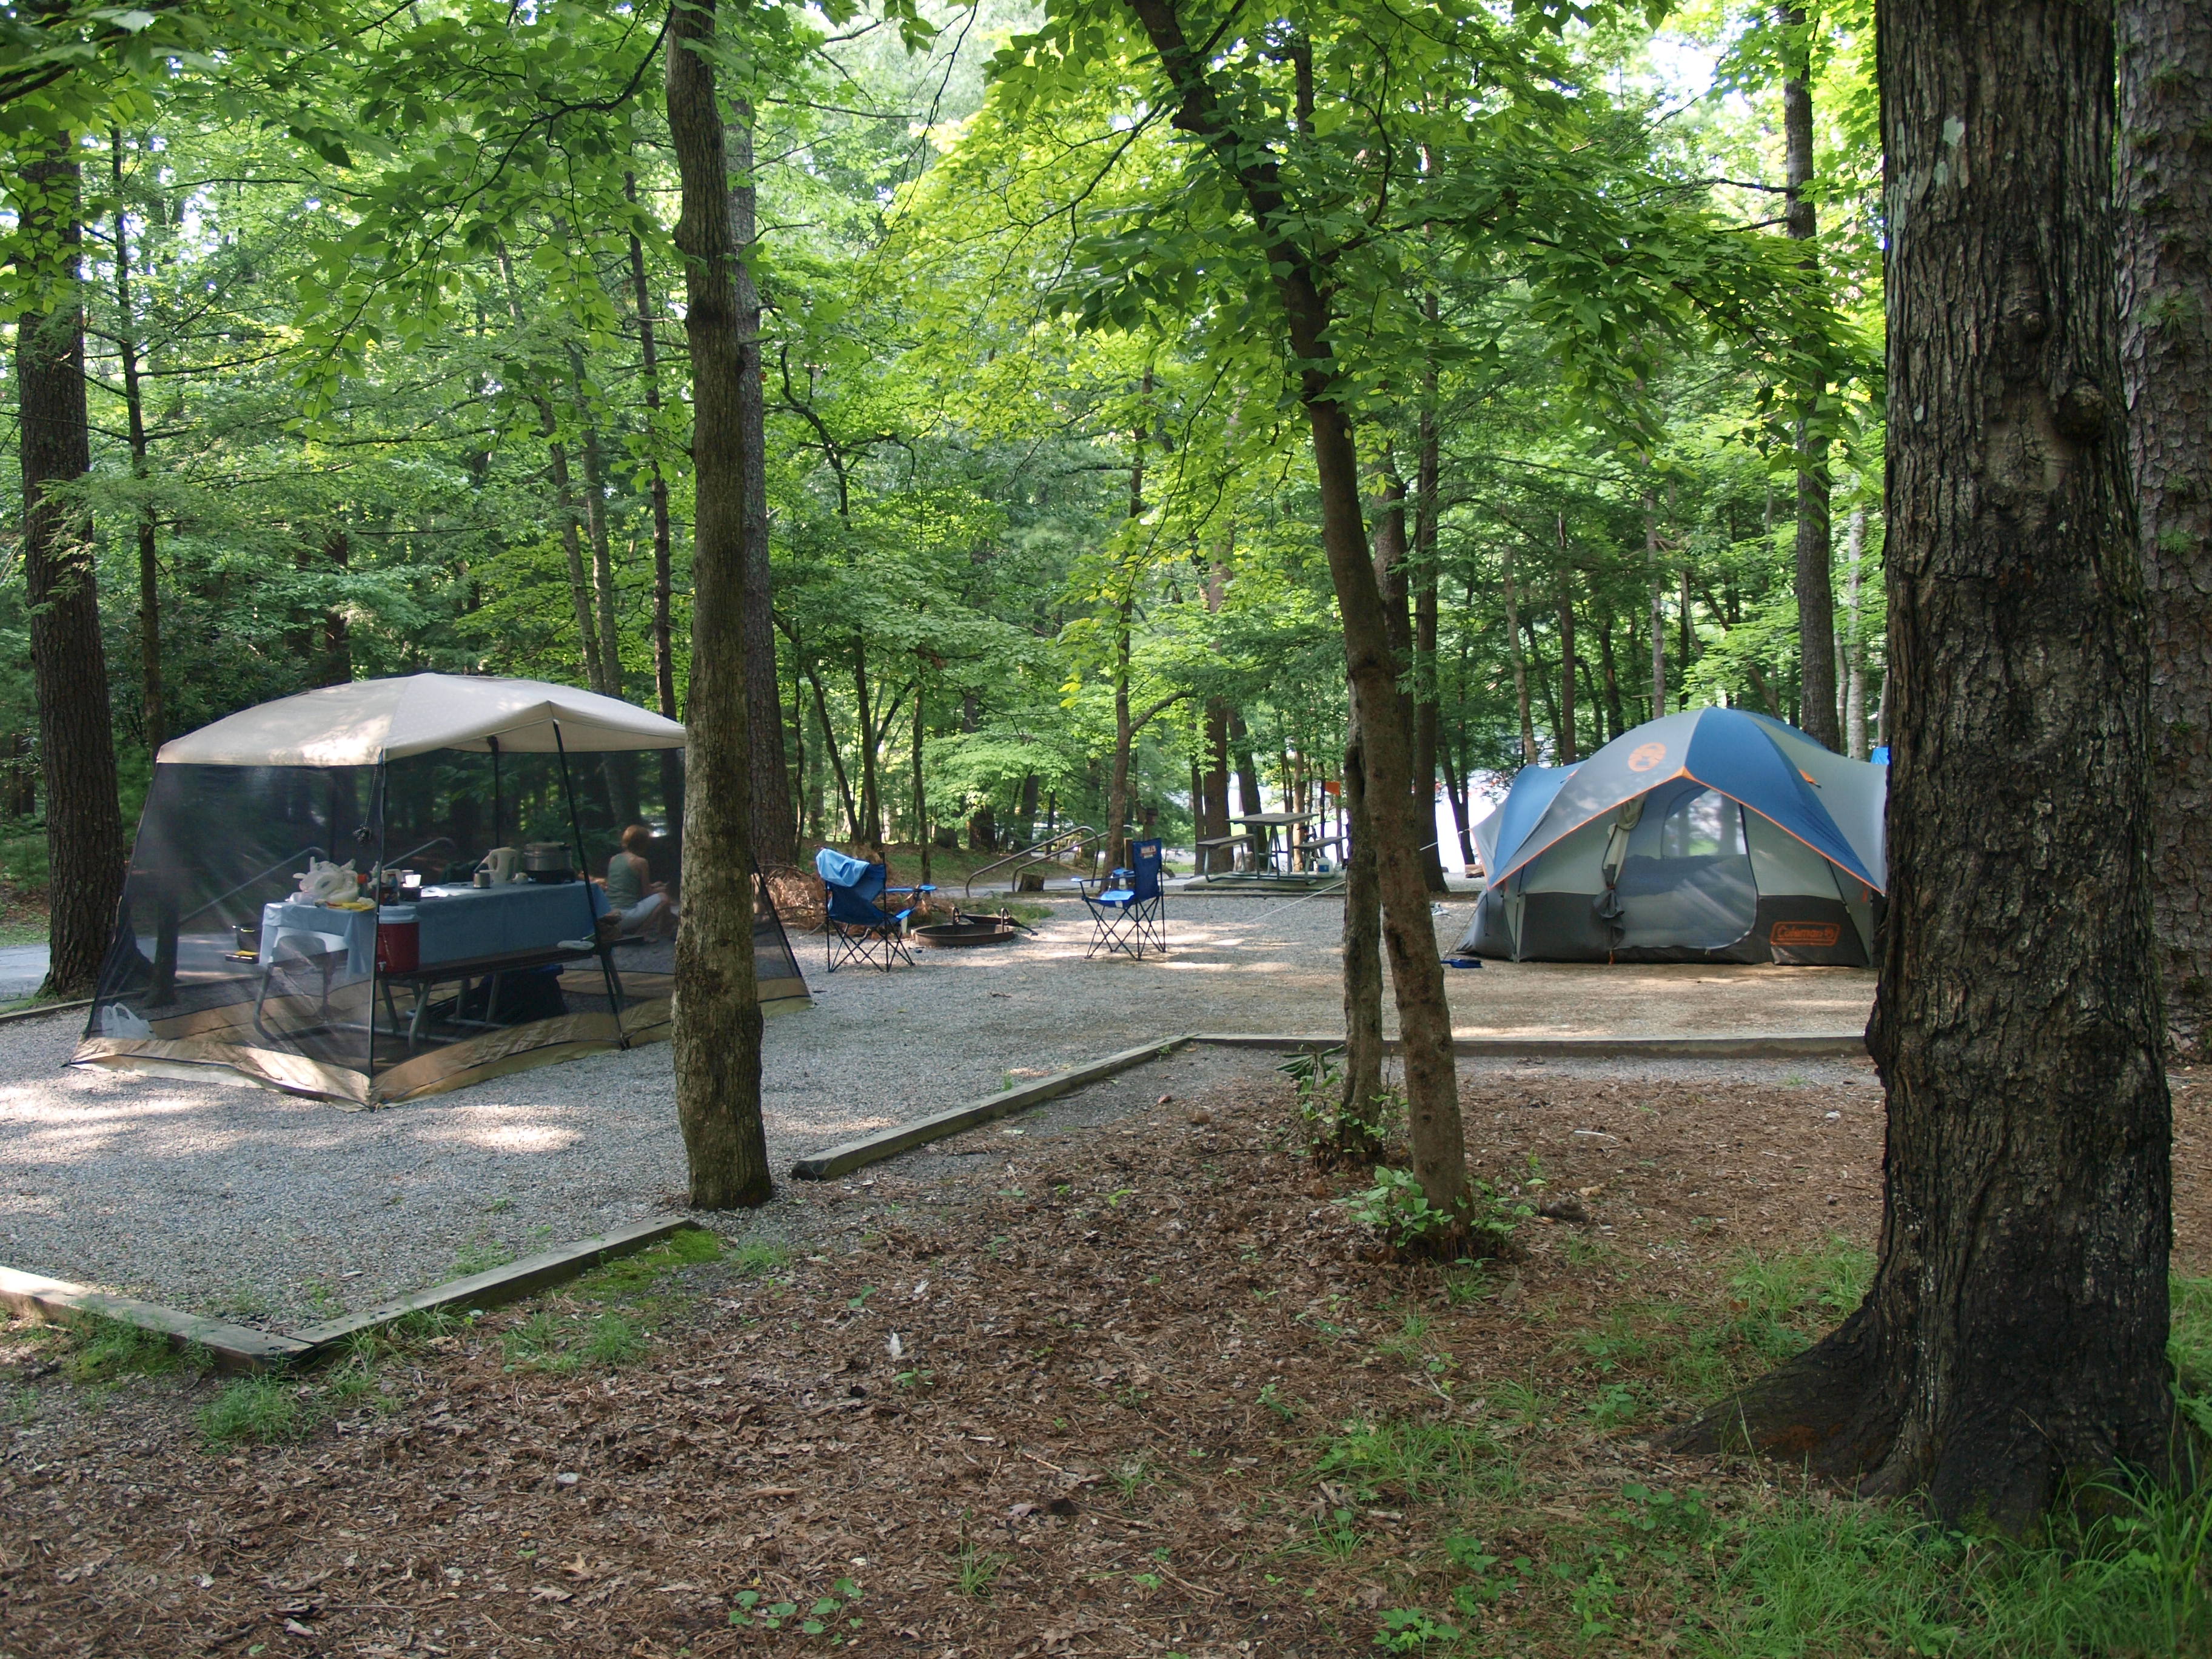 File:Cades Cove Camping Site.jpg - Wikimedia Commons